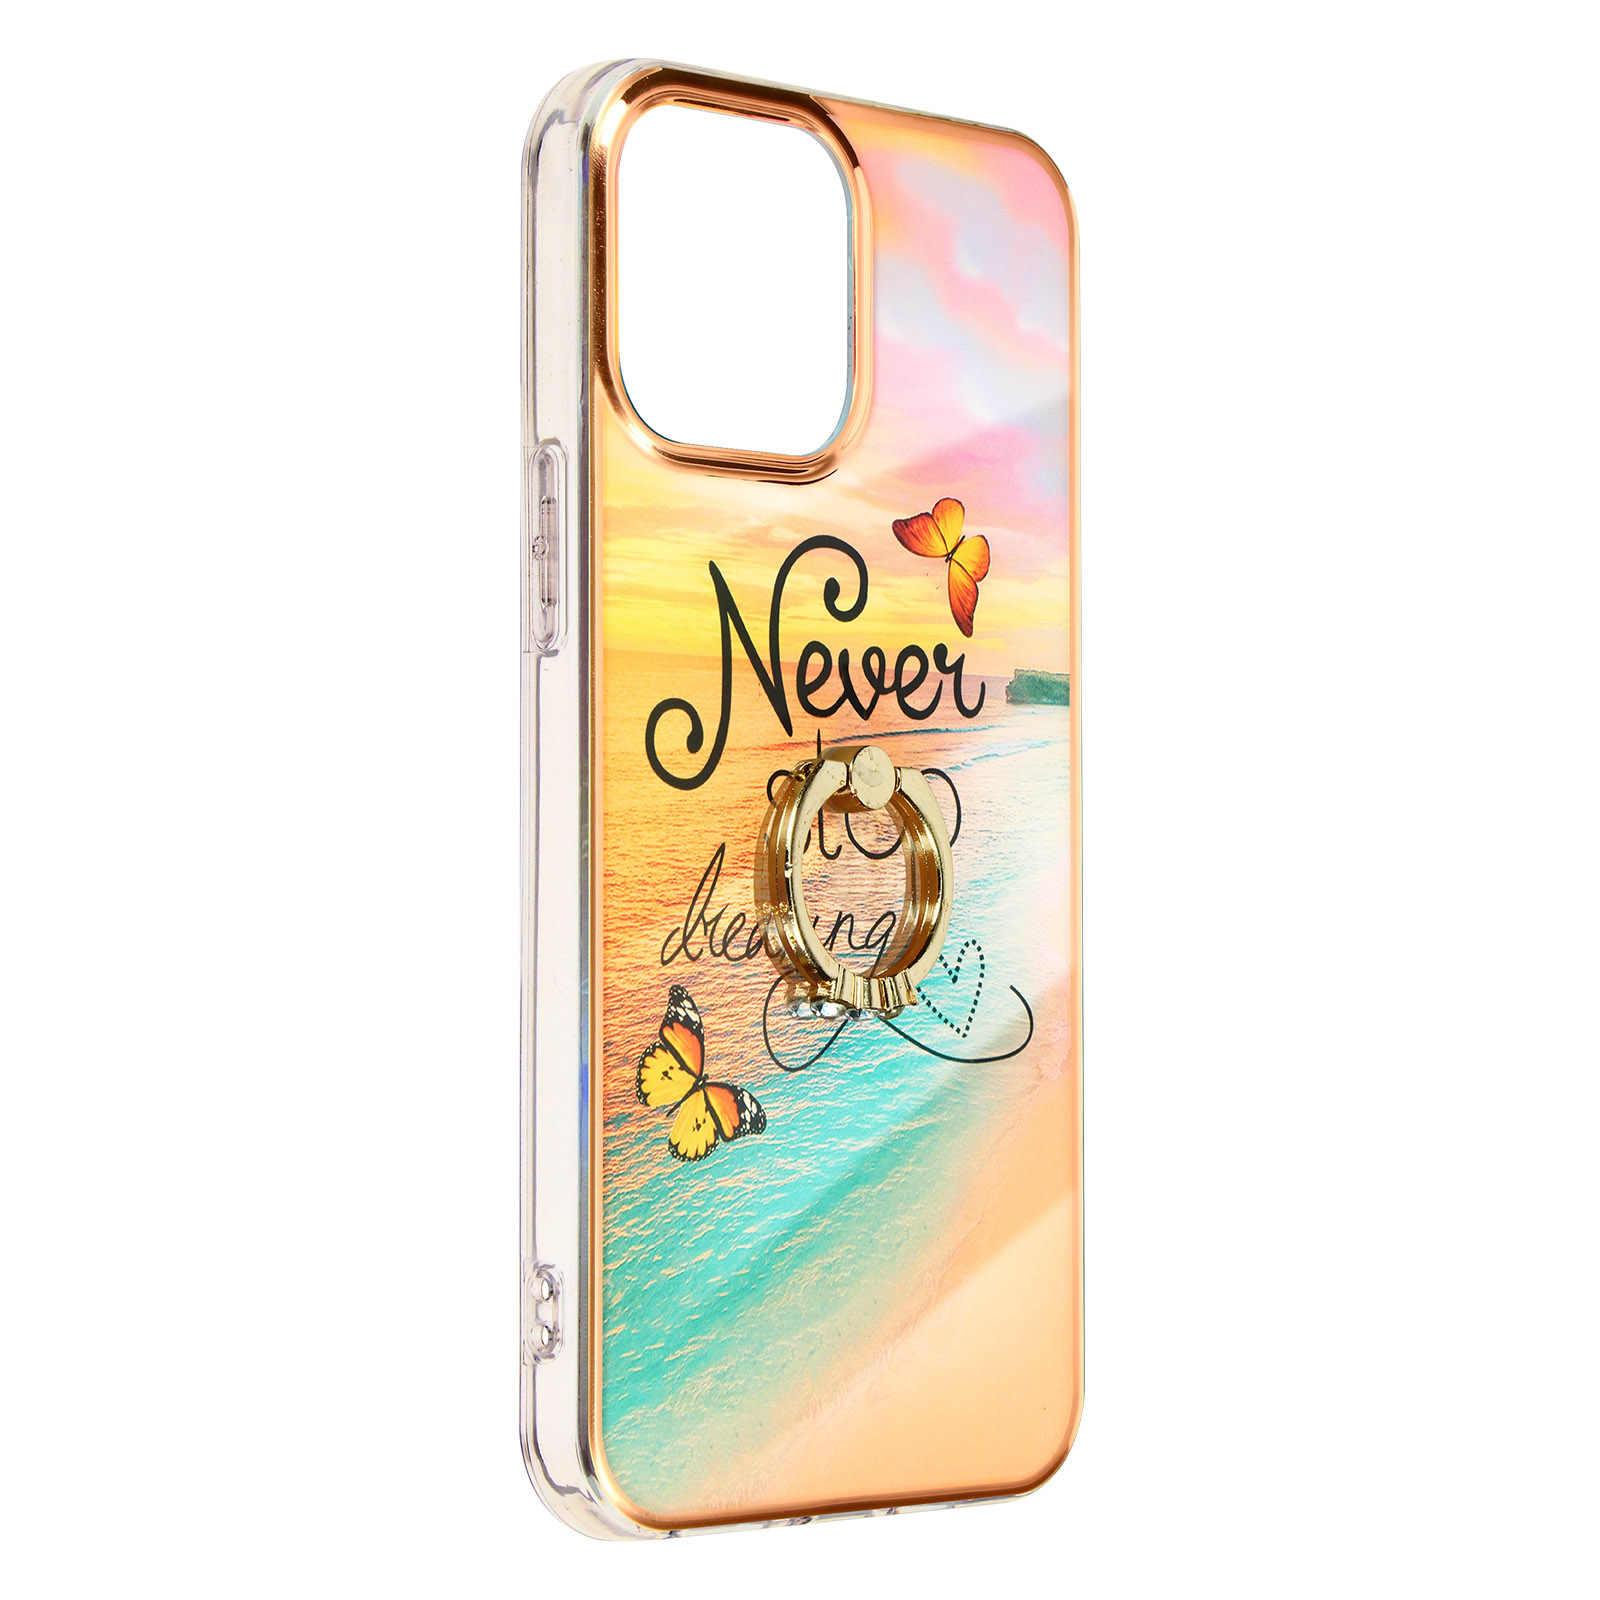 Pro Never Apple, Stop AVIZAR Series, 13 Orange Dreaming Max, iPhone Backcover,